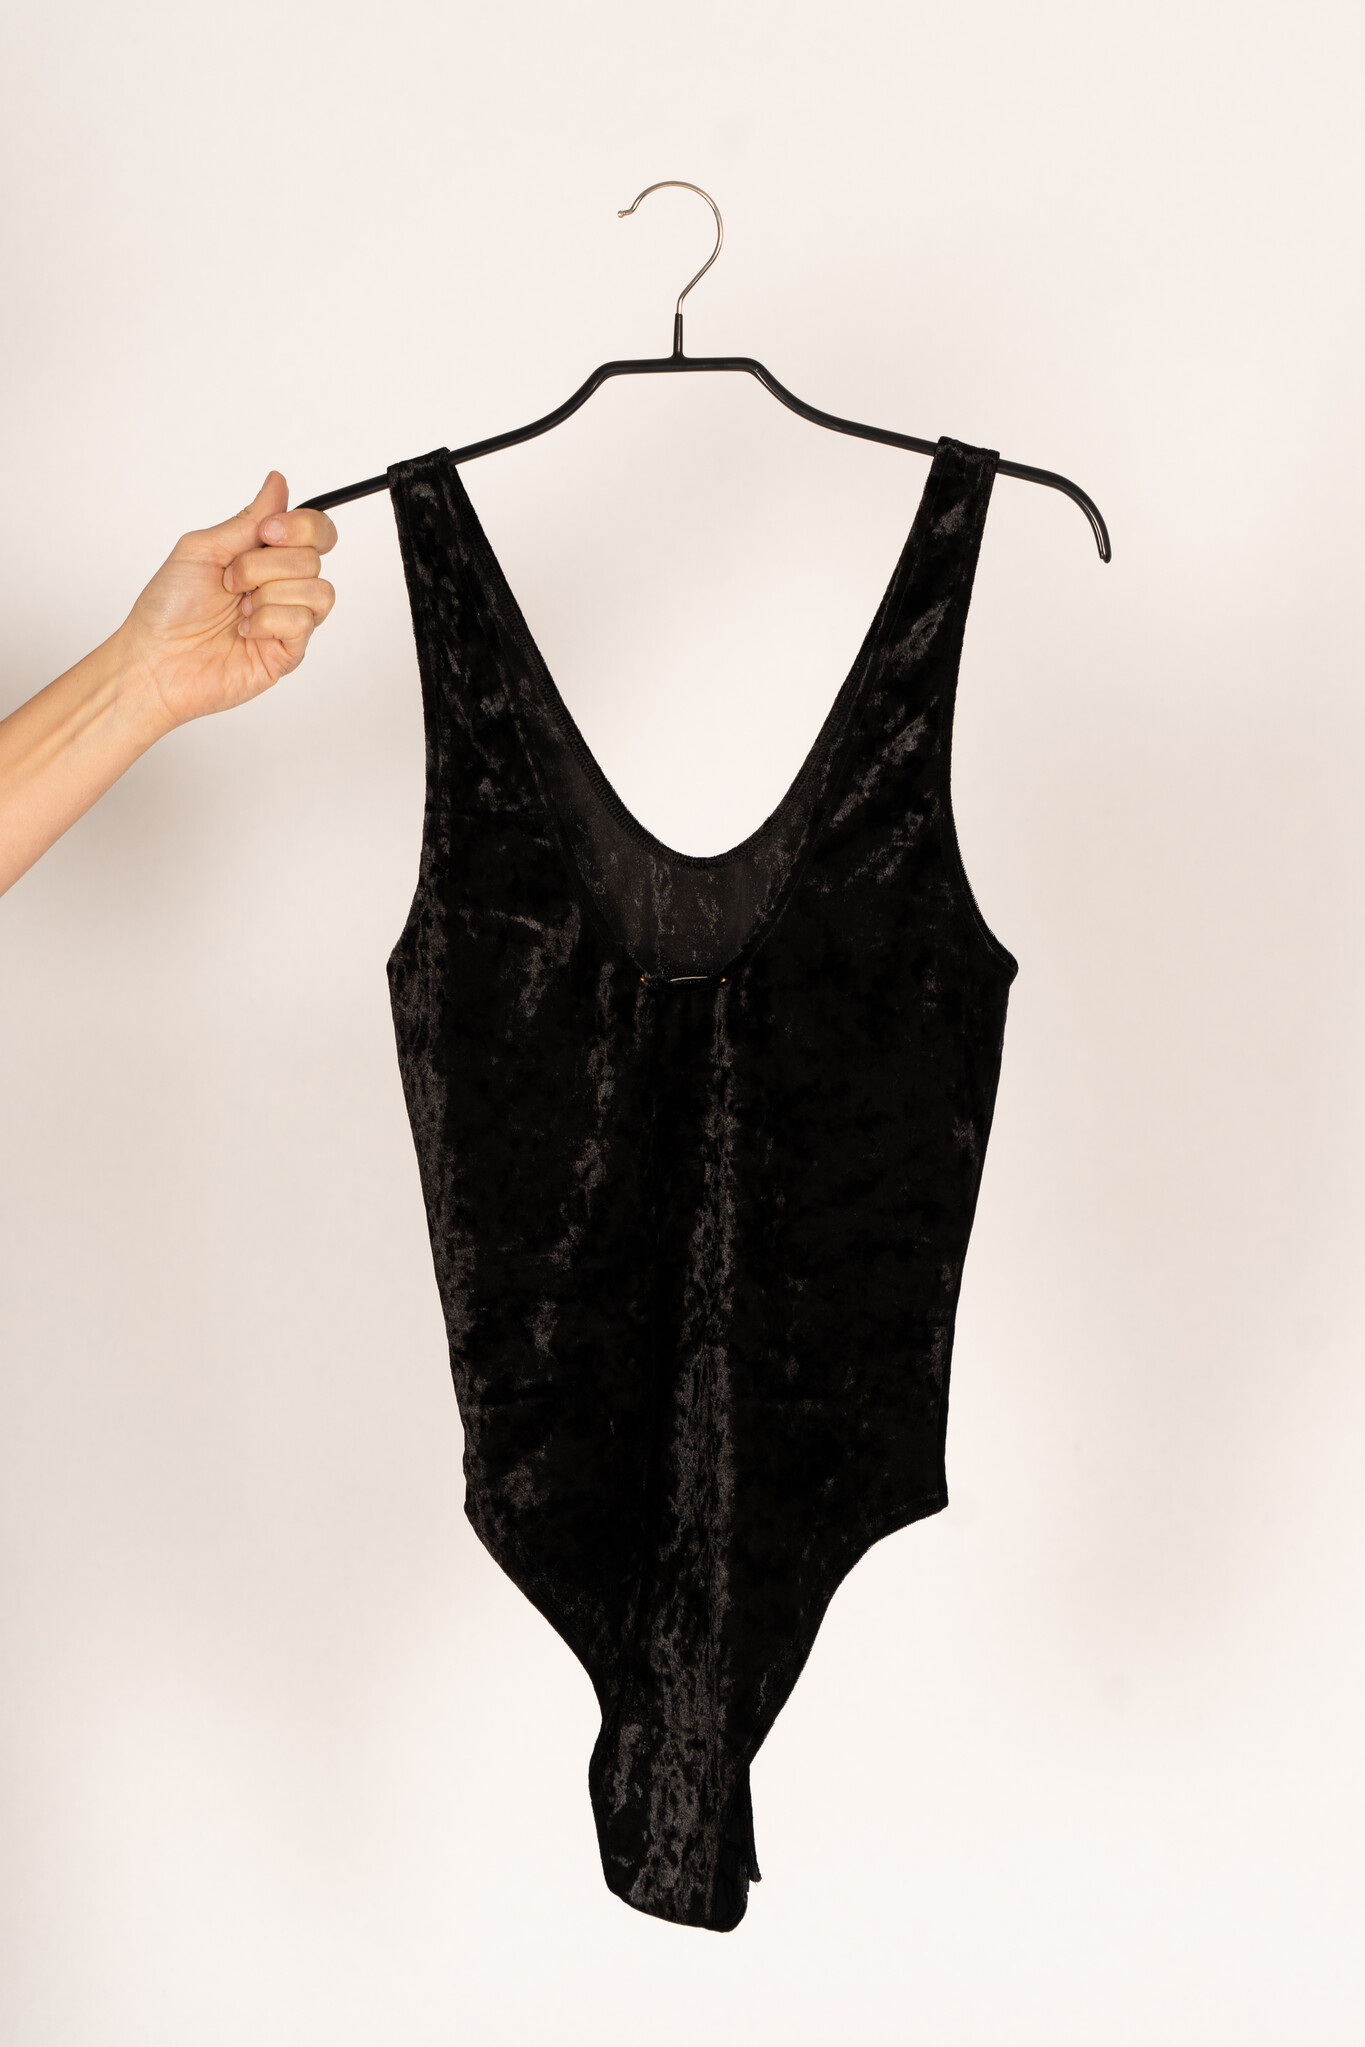 Make a statement in the Stretch Velvet Cut Out Bodysuit. Shop now